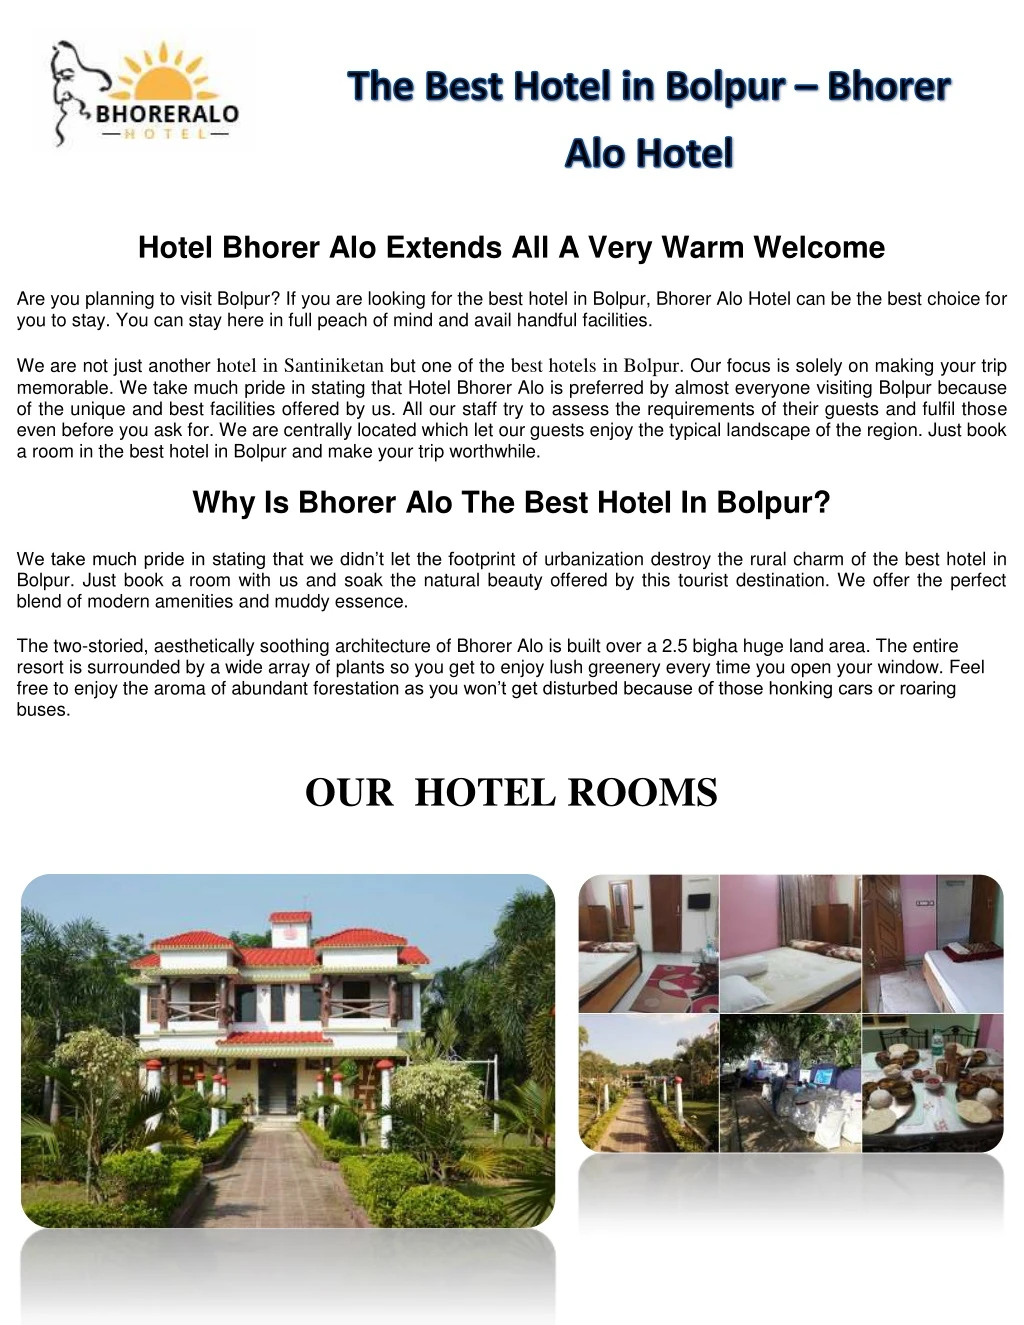 hotel bhorer alo extends all a very warm welcome